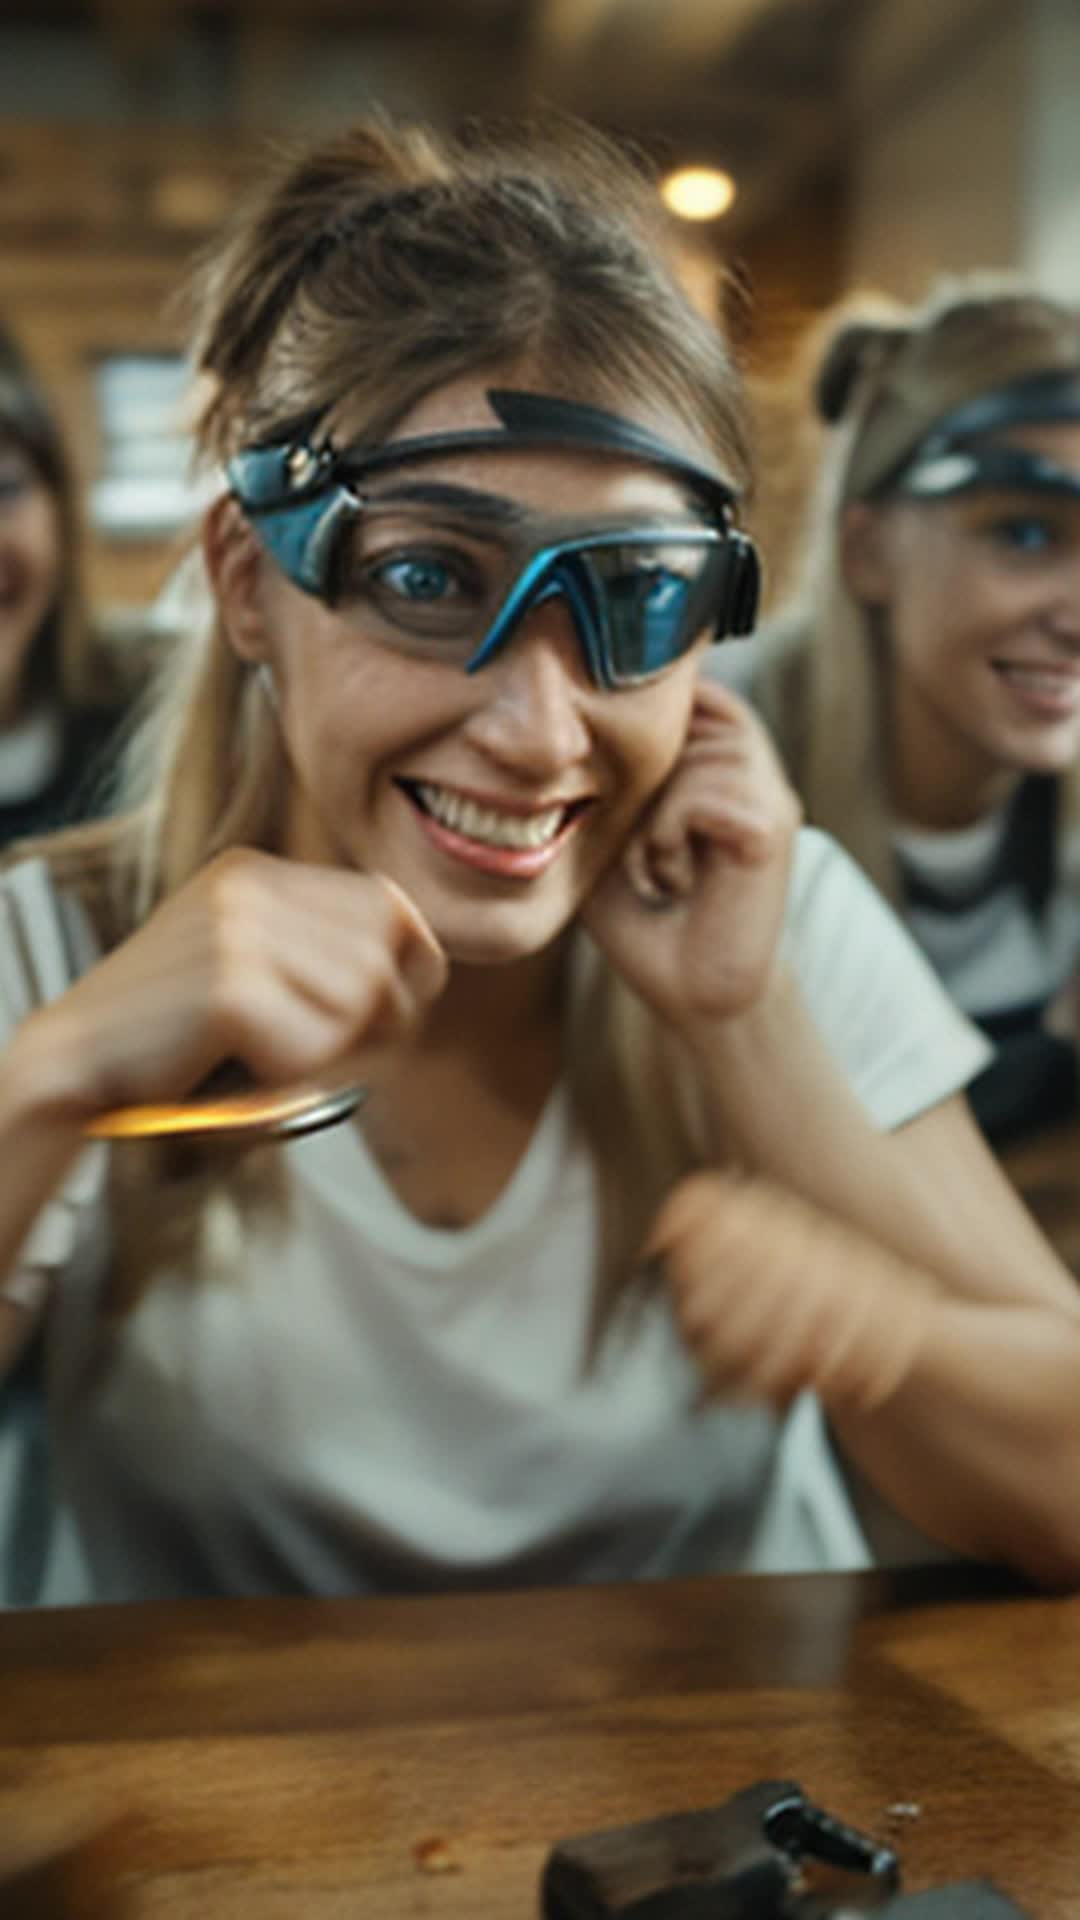 Mia swiftly adjusting safety goggles, exchanging grins with teammates, vibrant spark of excitement shared, workshop background, tools and wood pieces scattered, motivational, energetic ambiance